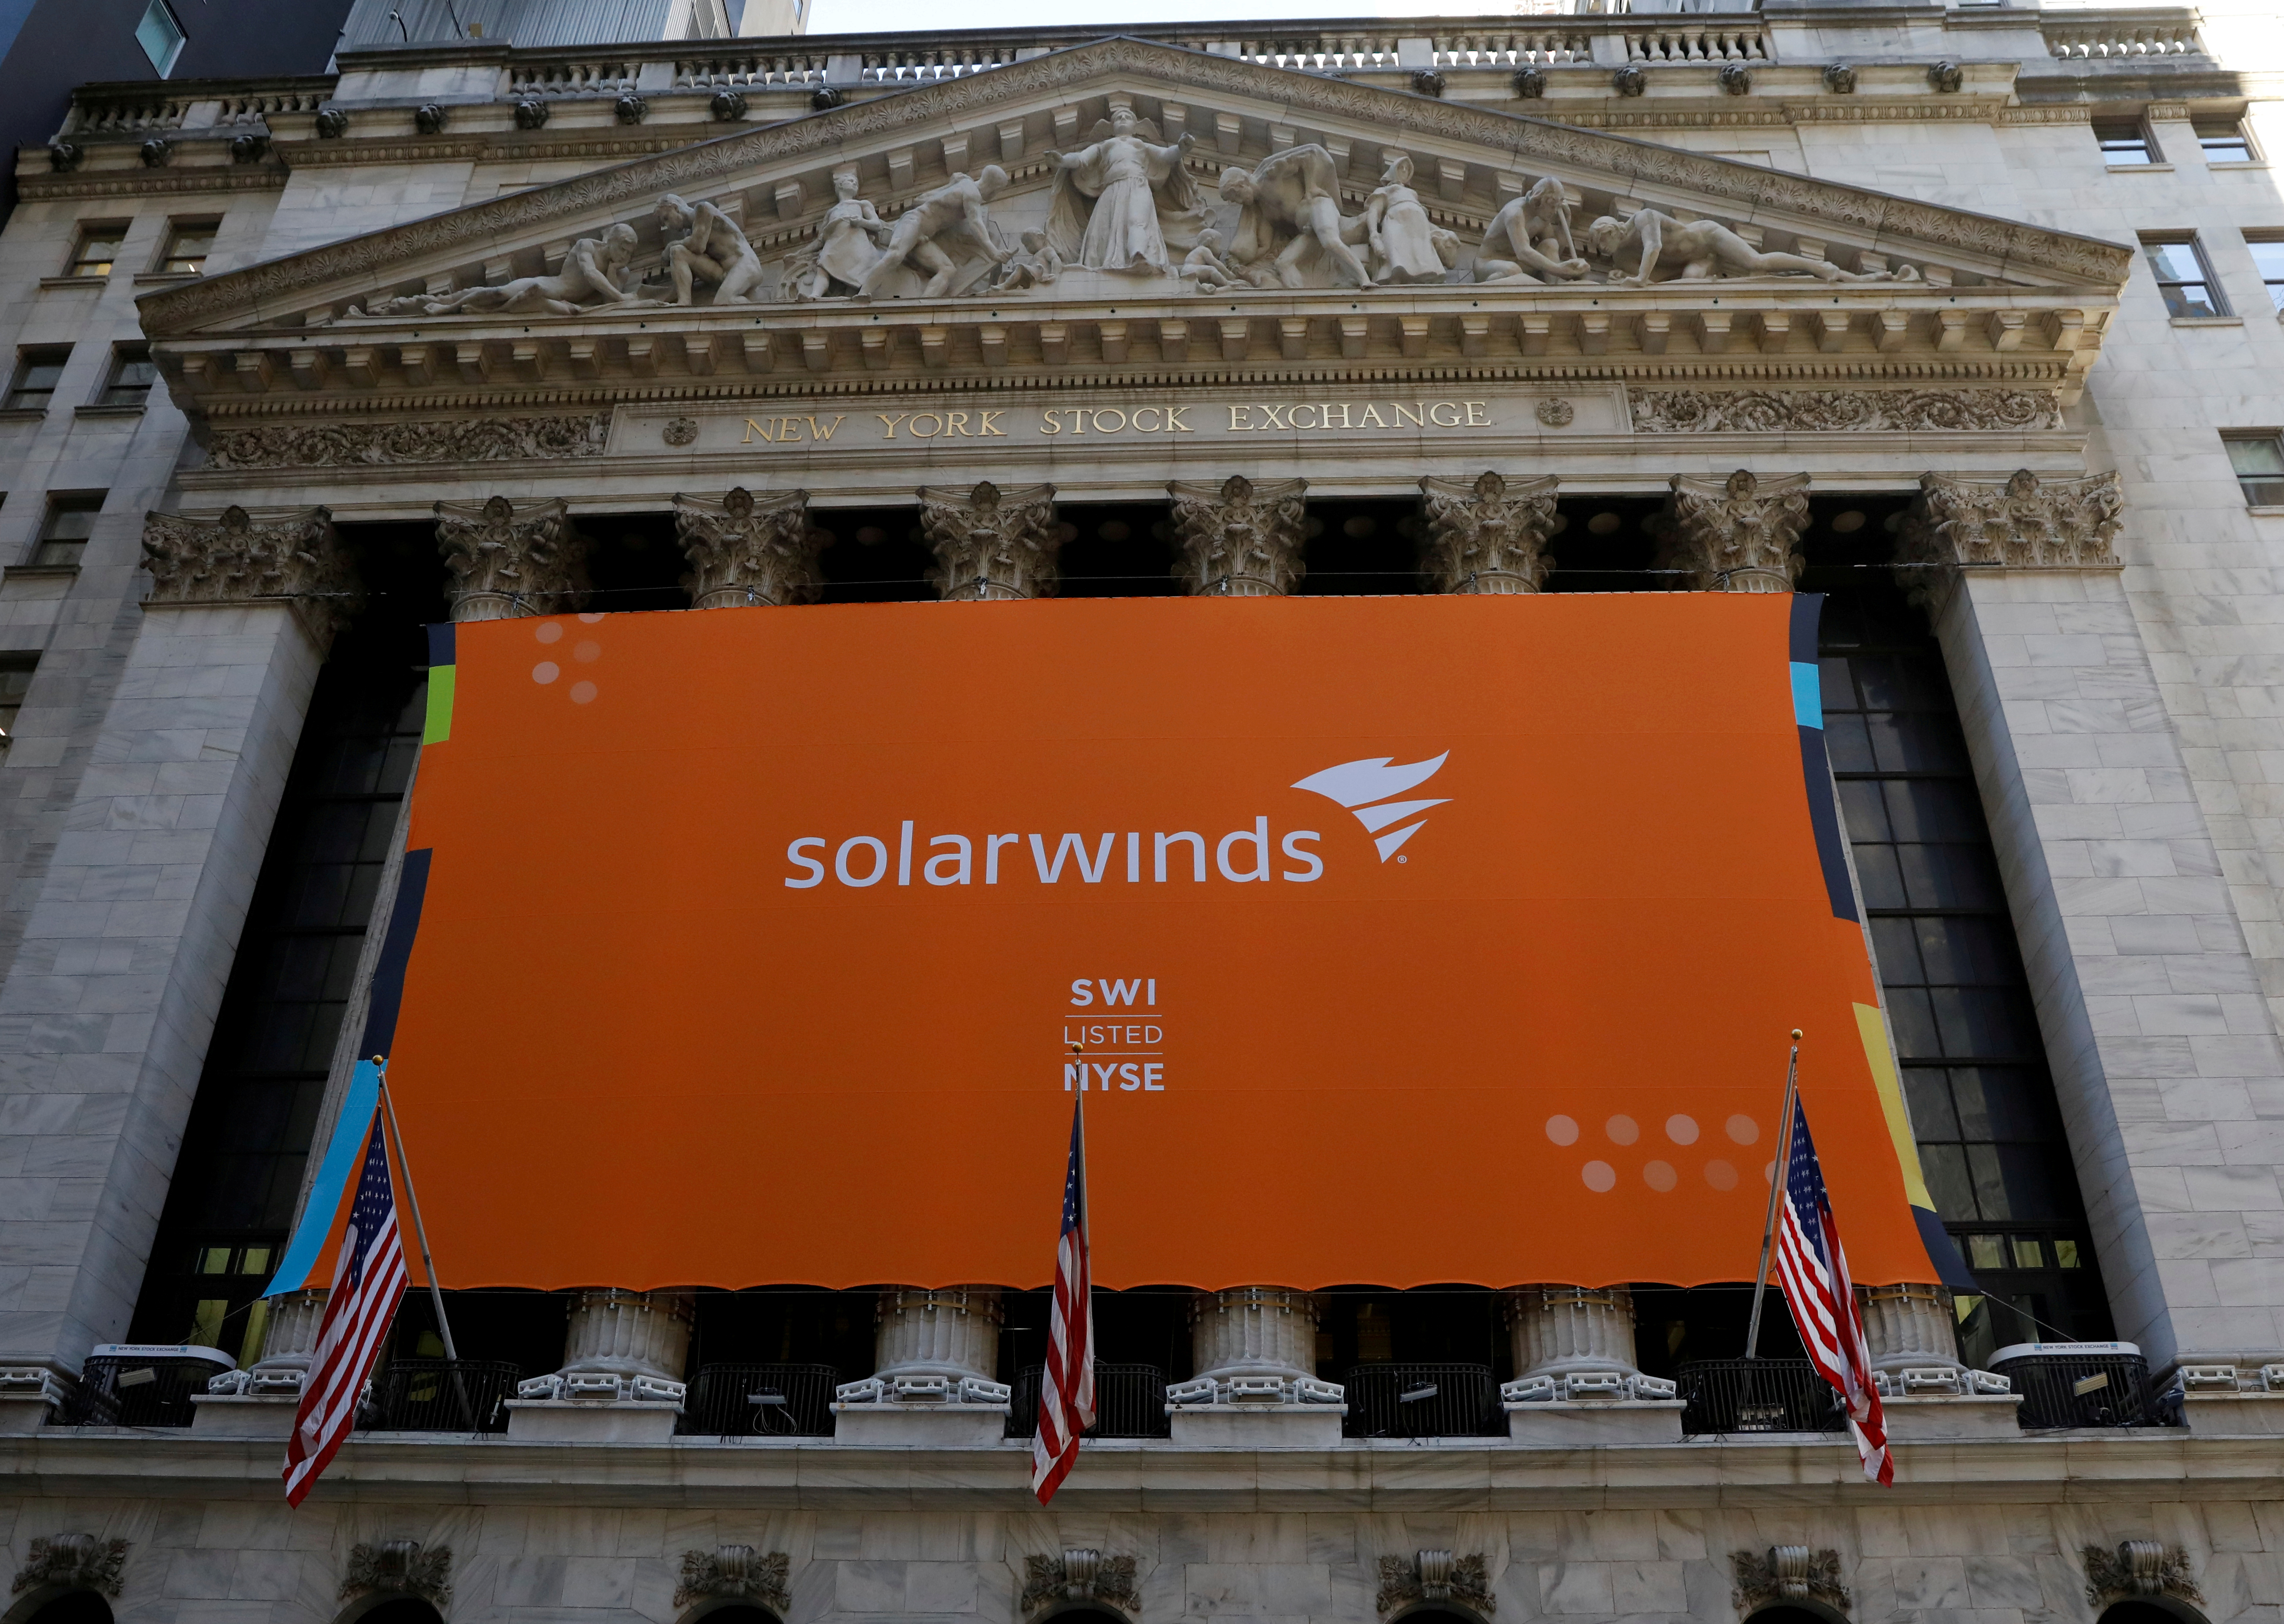 SolarWinds Corp banner hangs at the New York Stock Exchange (NYSE) on the IPO day of the company in New York, U.S., October 19, 2018. REUTERS/Brendan McDermid